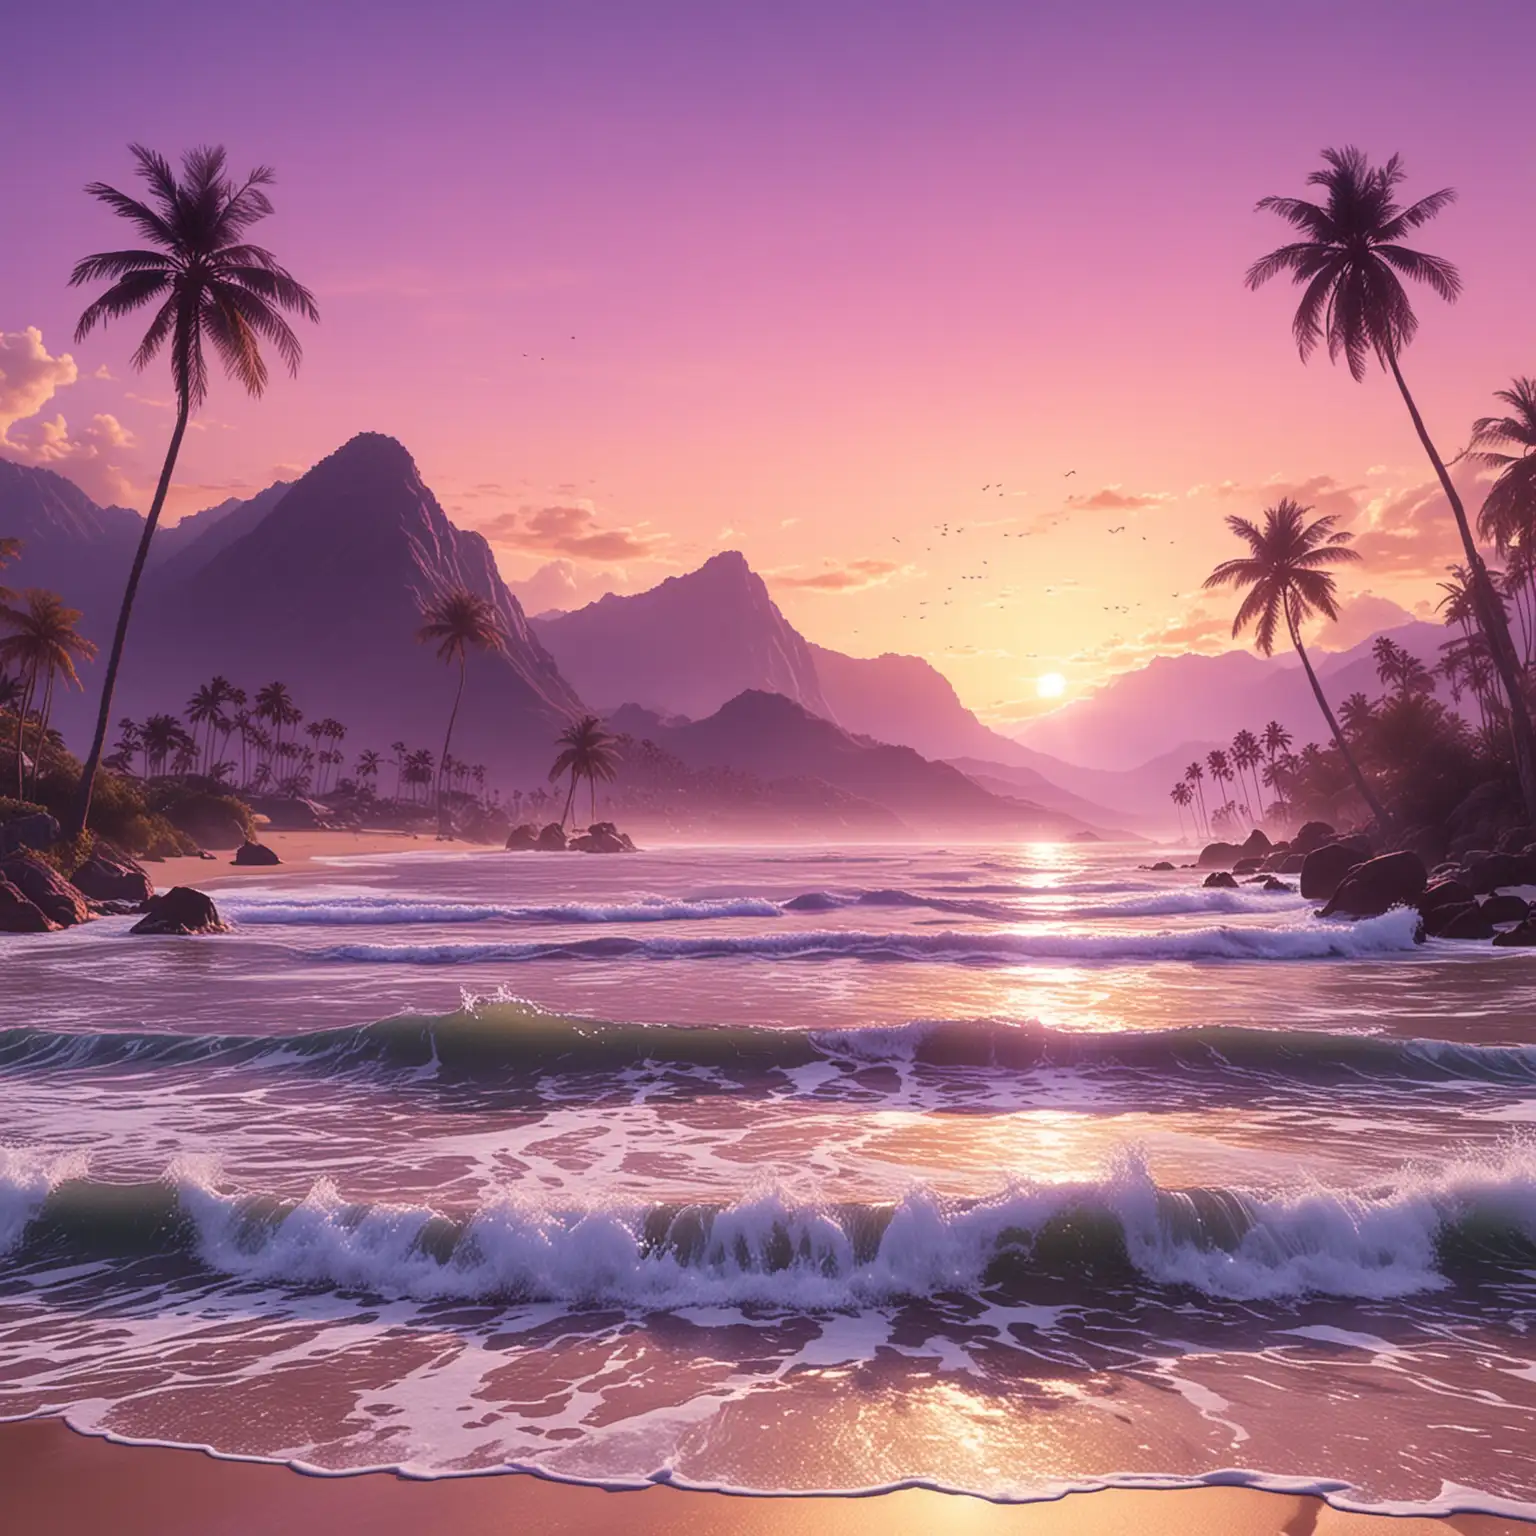 Tropical Sunset Landscape with Mountains and Palm Trees